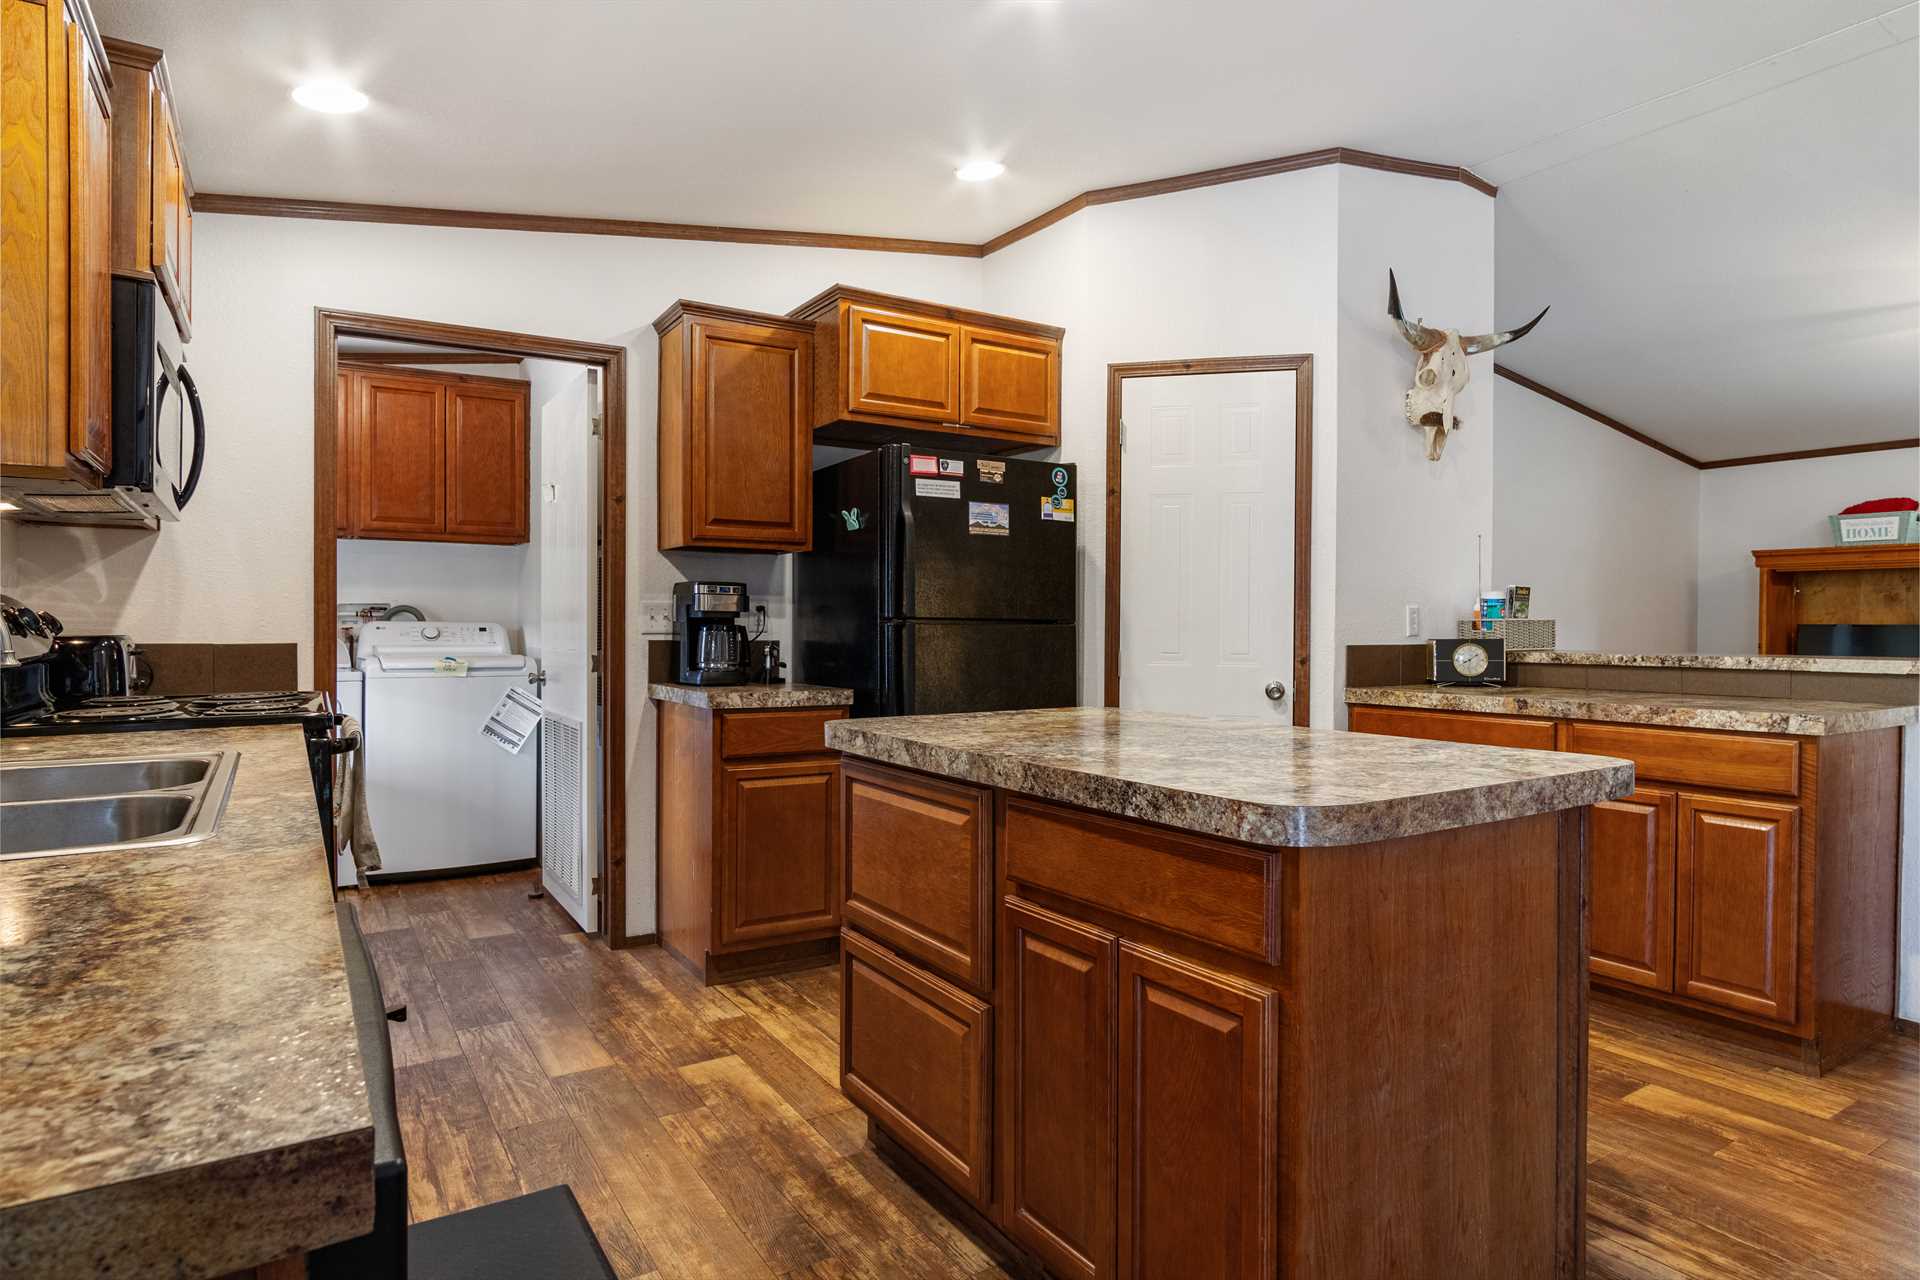                                                 With a great big central island and plenty of counter and floor space, there's no bumping elbows in the Hideaway's roomy kitchen!